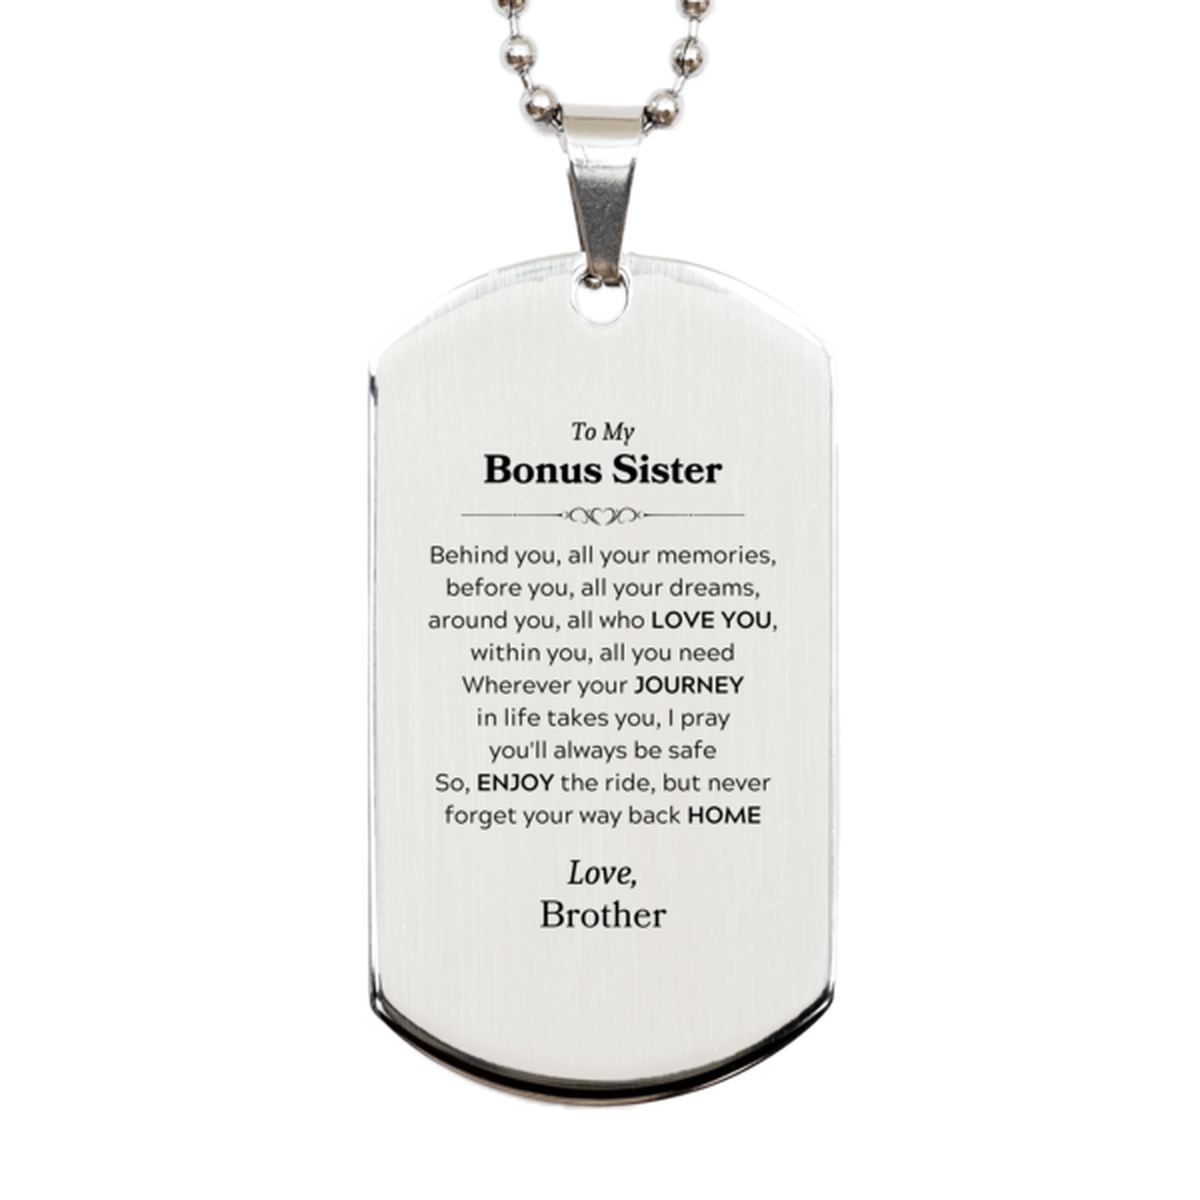 To My Bonus Sister Graduation Gifts from Brother, Bonus Sister Silver Dog Tag Christmas Birthday Gifts for Bonus Sister Behind you, all your memories, before you, all your dreams. Love, Brother